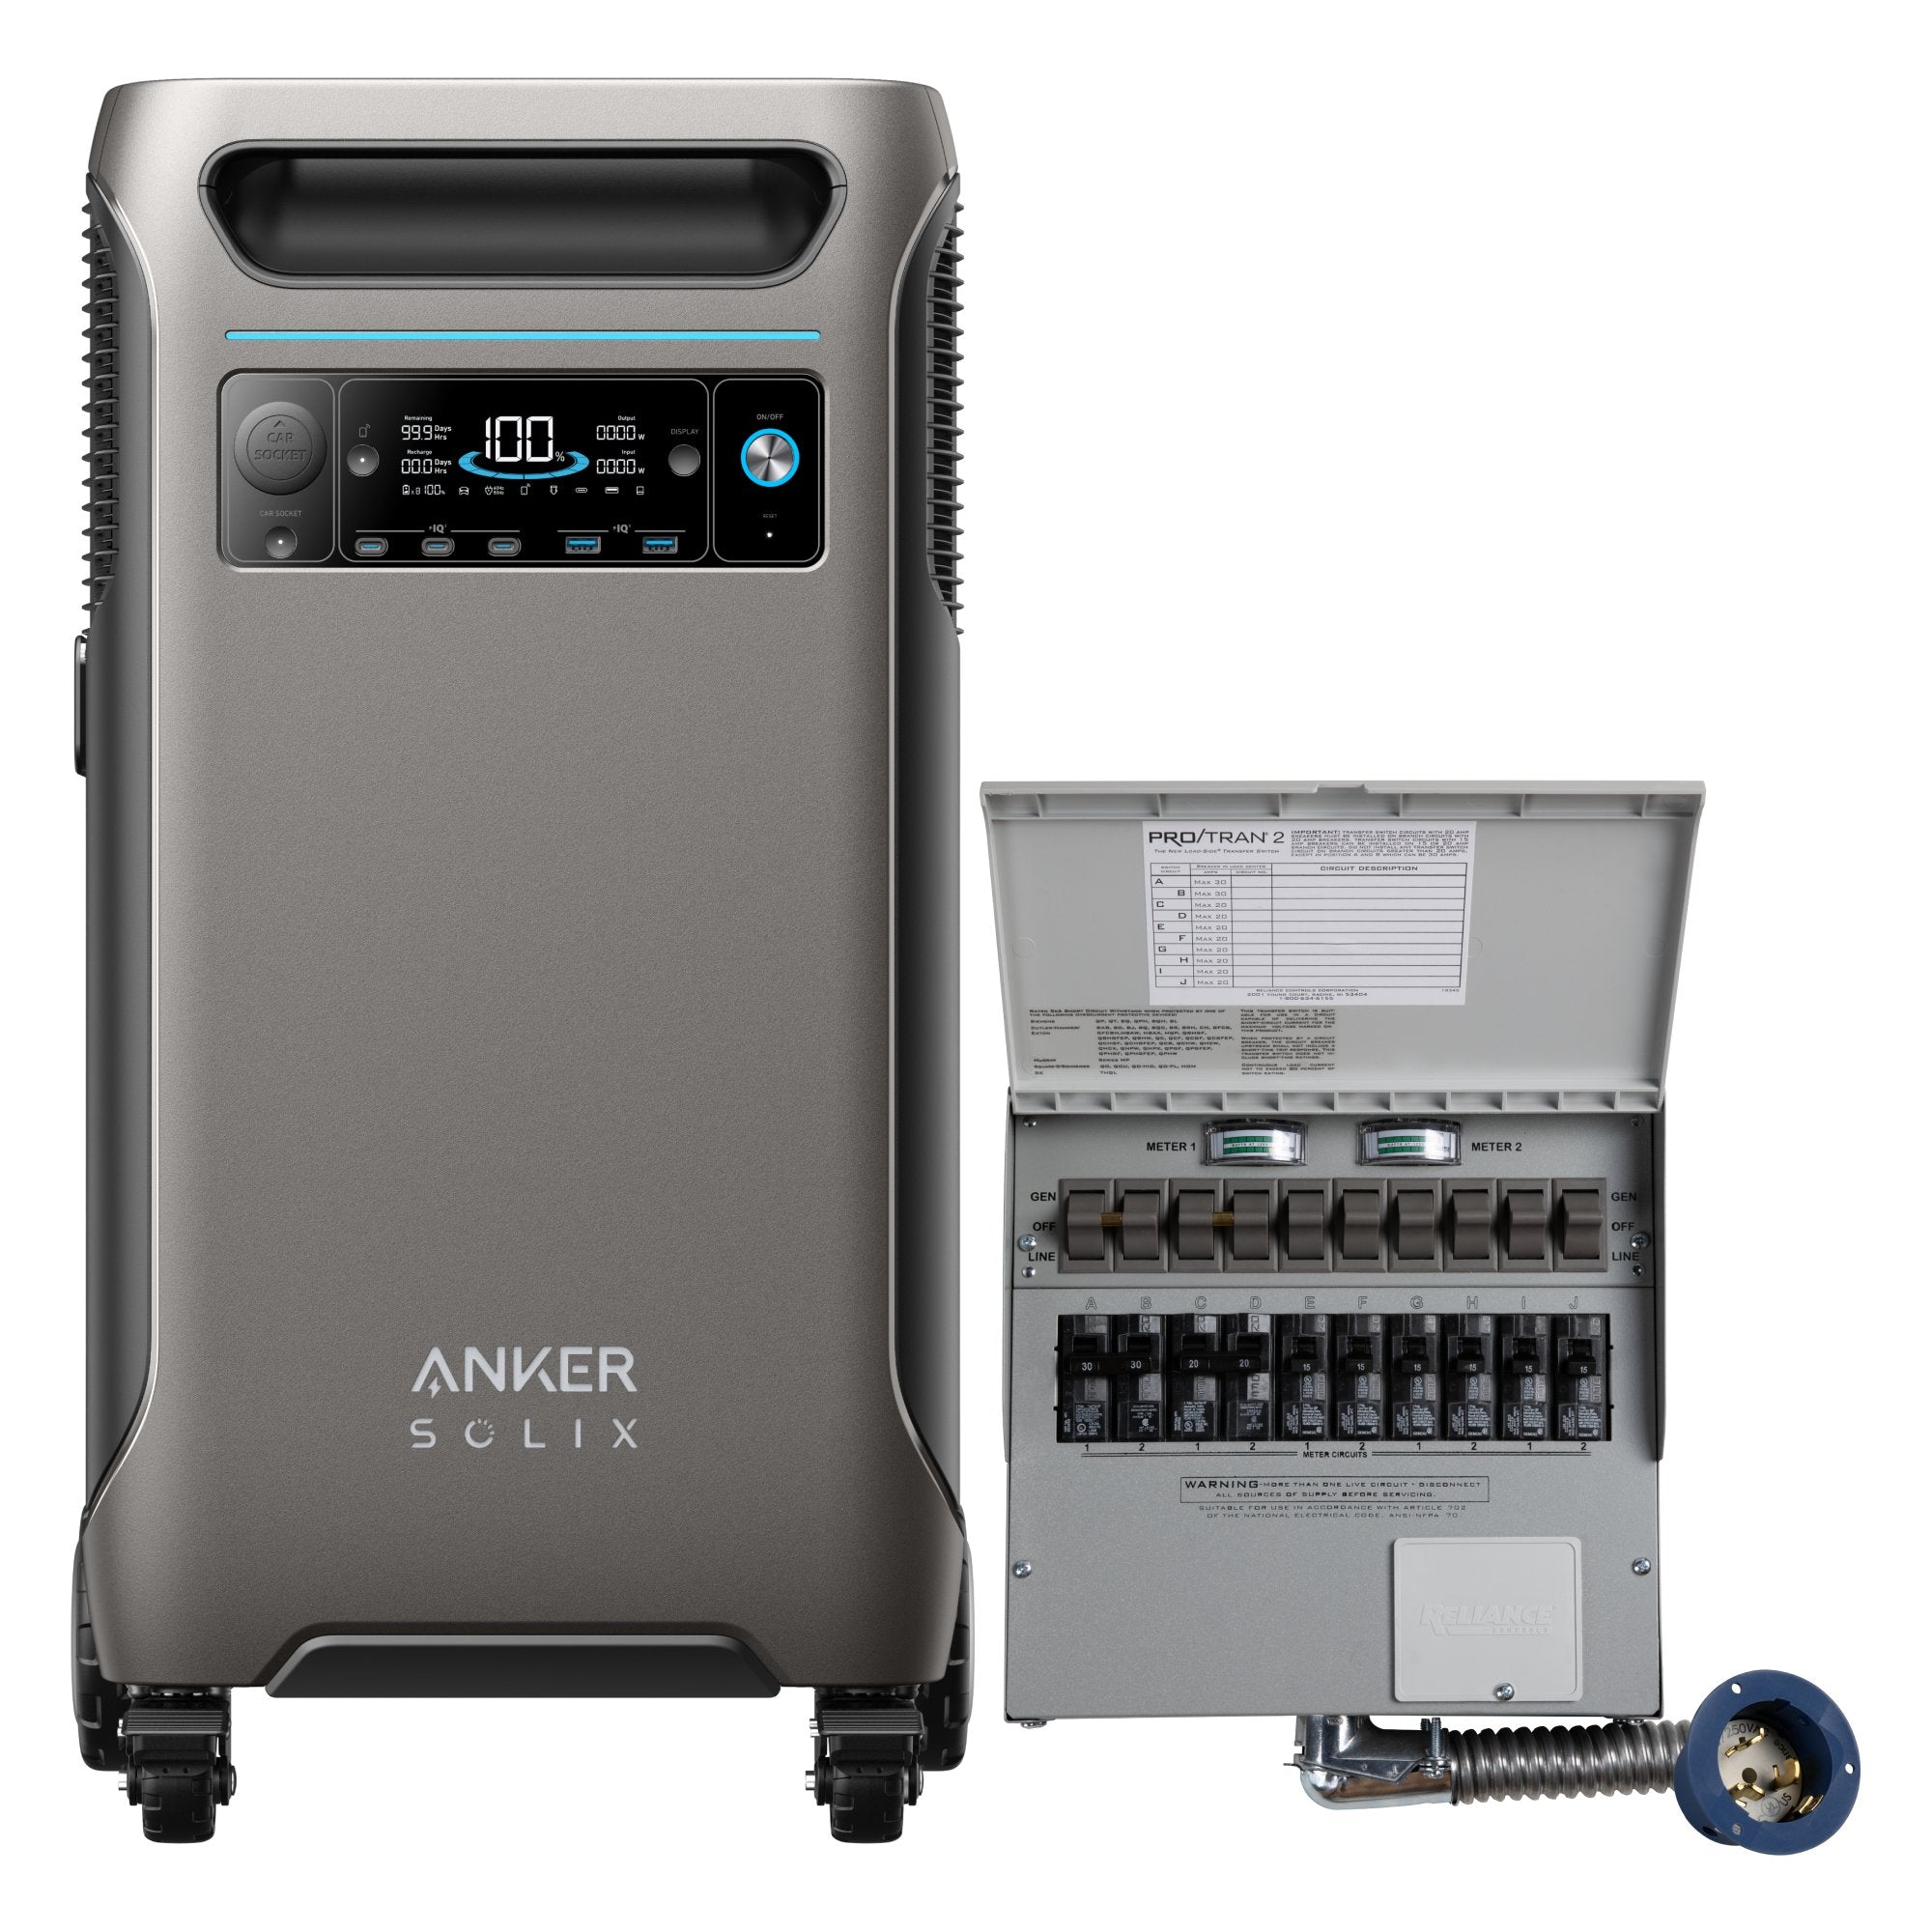 Anker SOLIX F3800 + Transfer Switch + 2x 400W Solar Panel - Solar Generators and Power Stations Plus